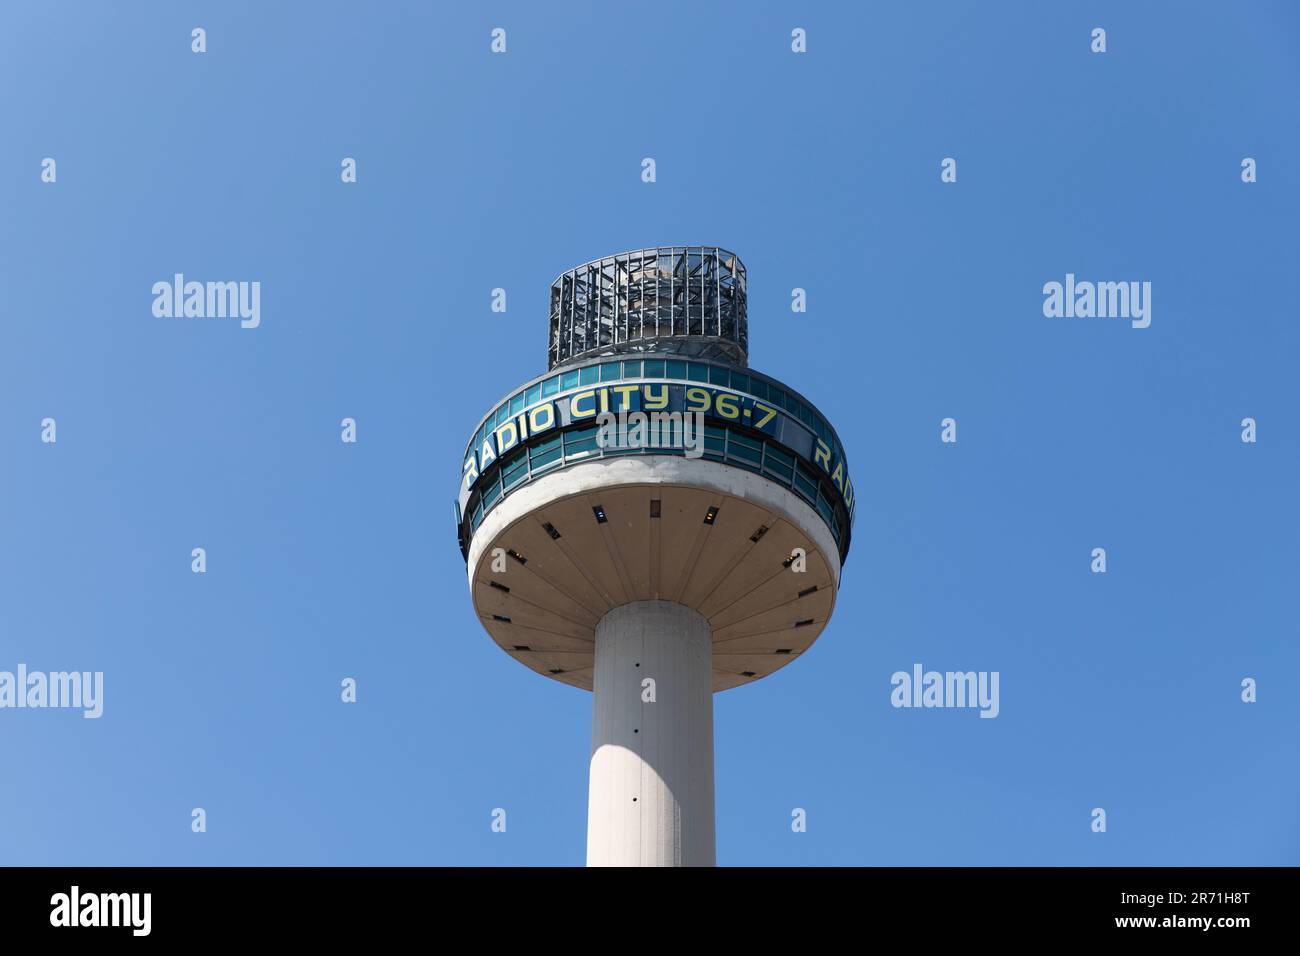 St John's Beacon, Liverpool (Radio City 96.7) 360-degree viewing platform / gallery, isolated against a blue sky. Stock Photo